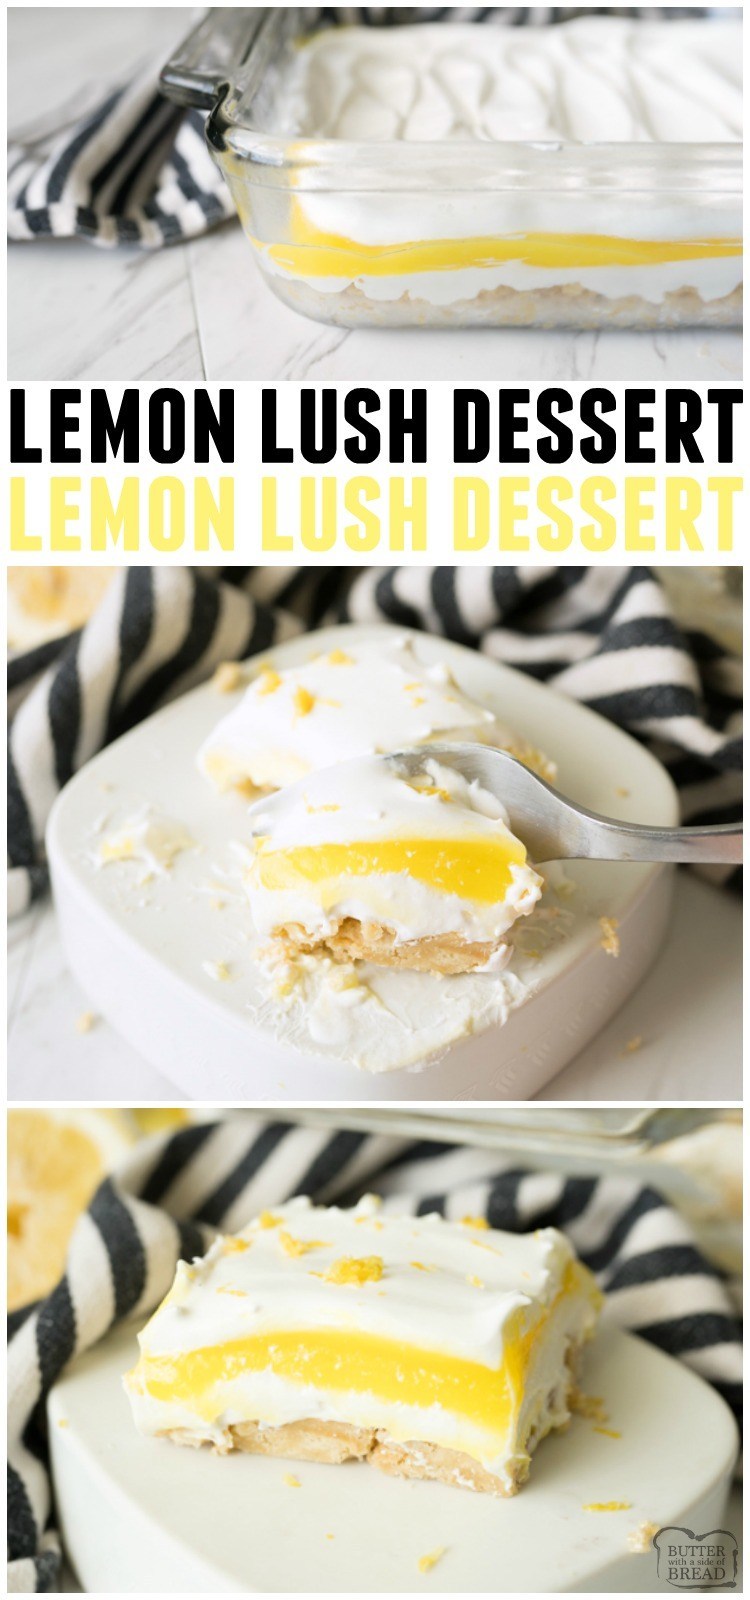 Lemon Lush is an easy no bake lemon dessert that comes together fast and serves a crowd. Throw this lemon lush dessert together quickly for a potluck or bbq... all of your guests will love it! #lemon #pudding #dessert #nobake #summer #recipe from BUTTER WITH A SIDE OF BREAD